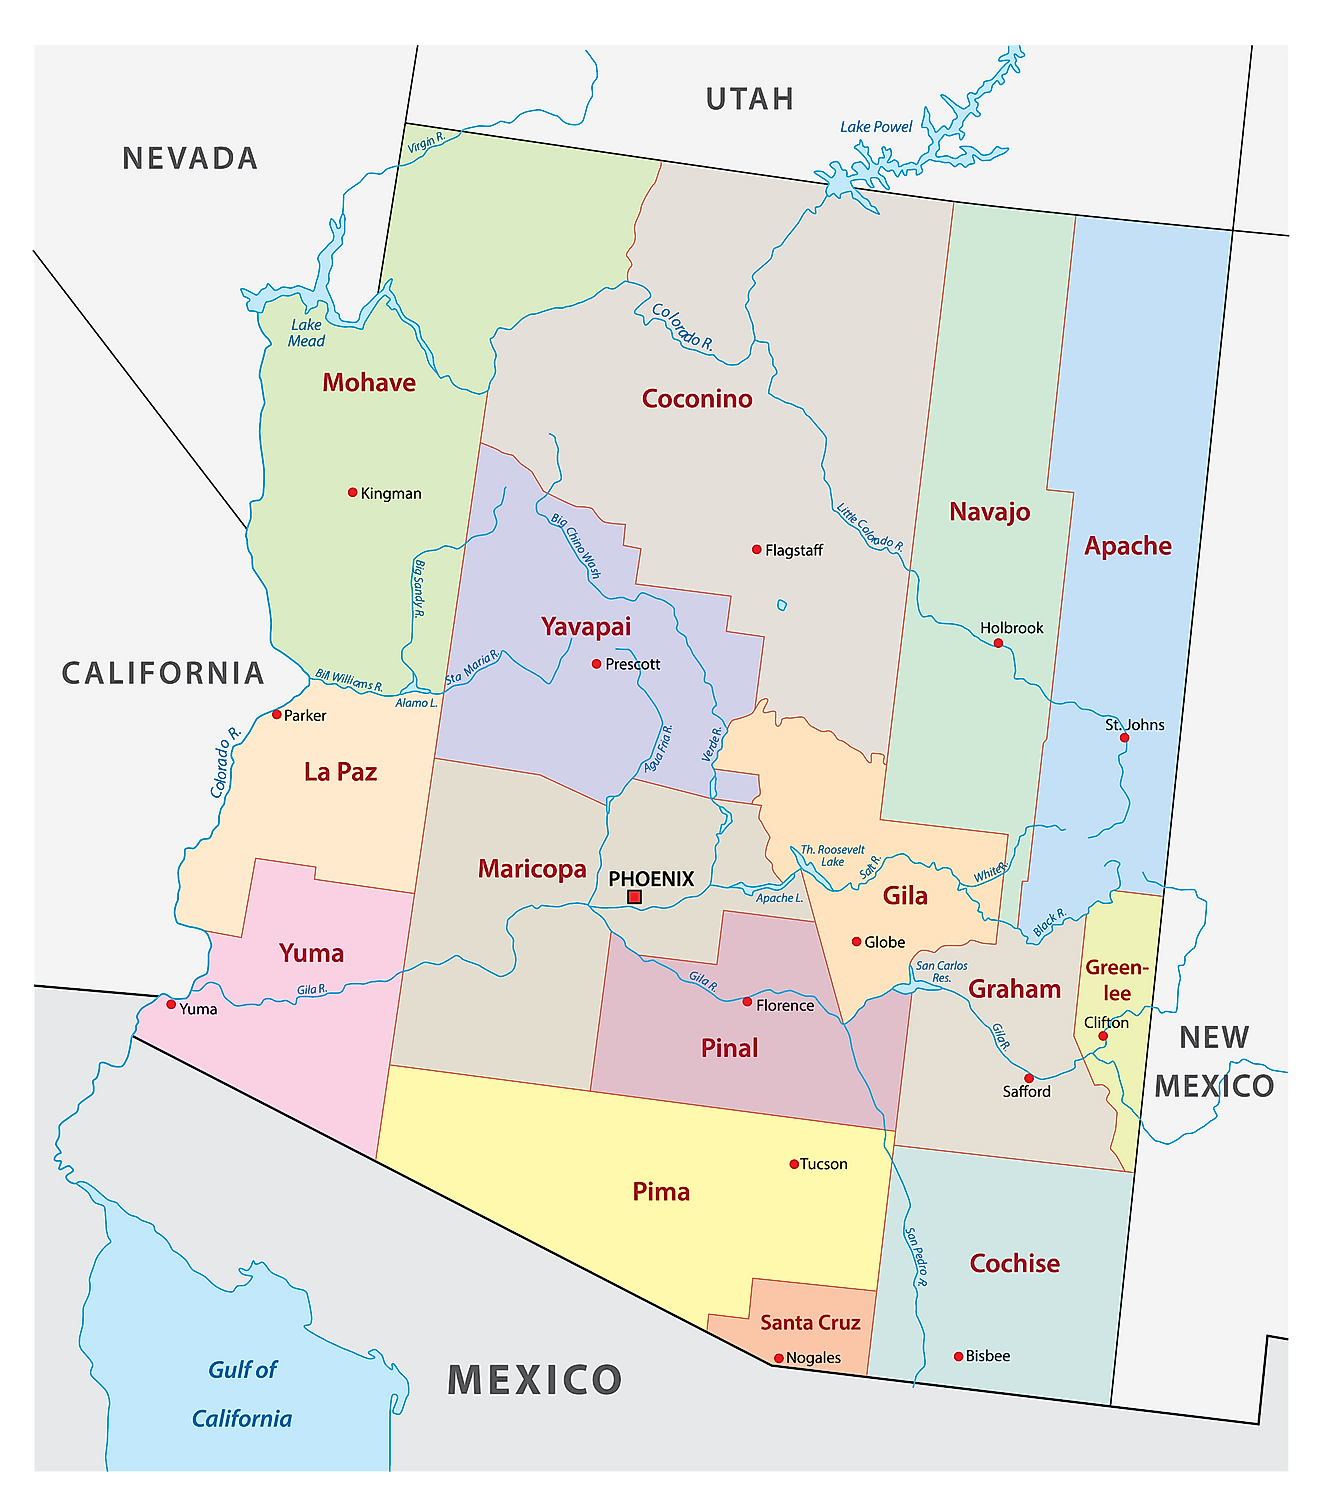 Administrative Map of Arizona showing its 15 counties and capital city - Phoenix